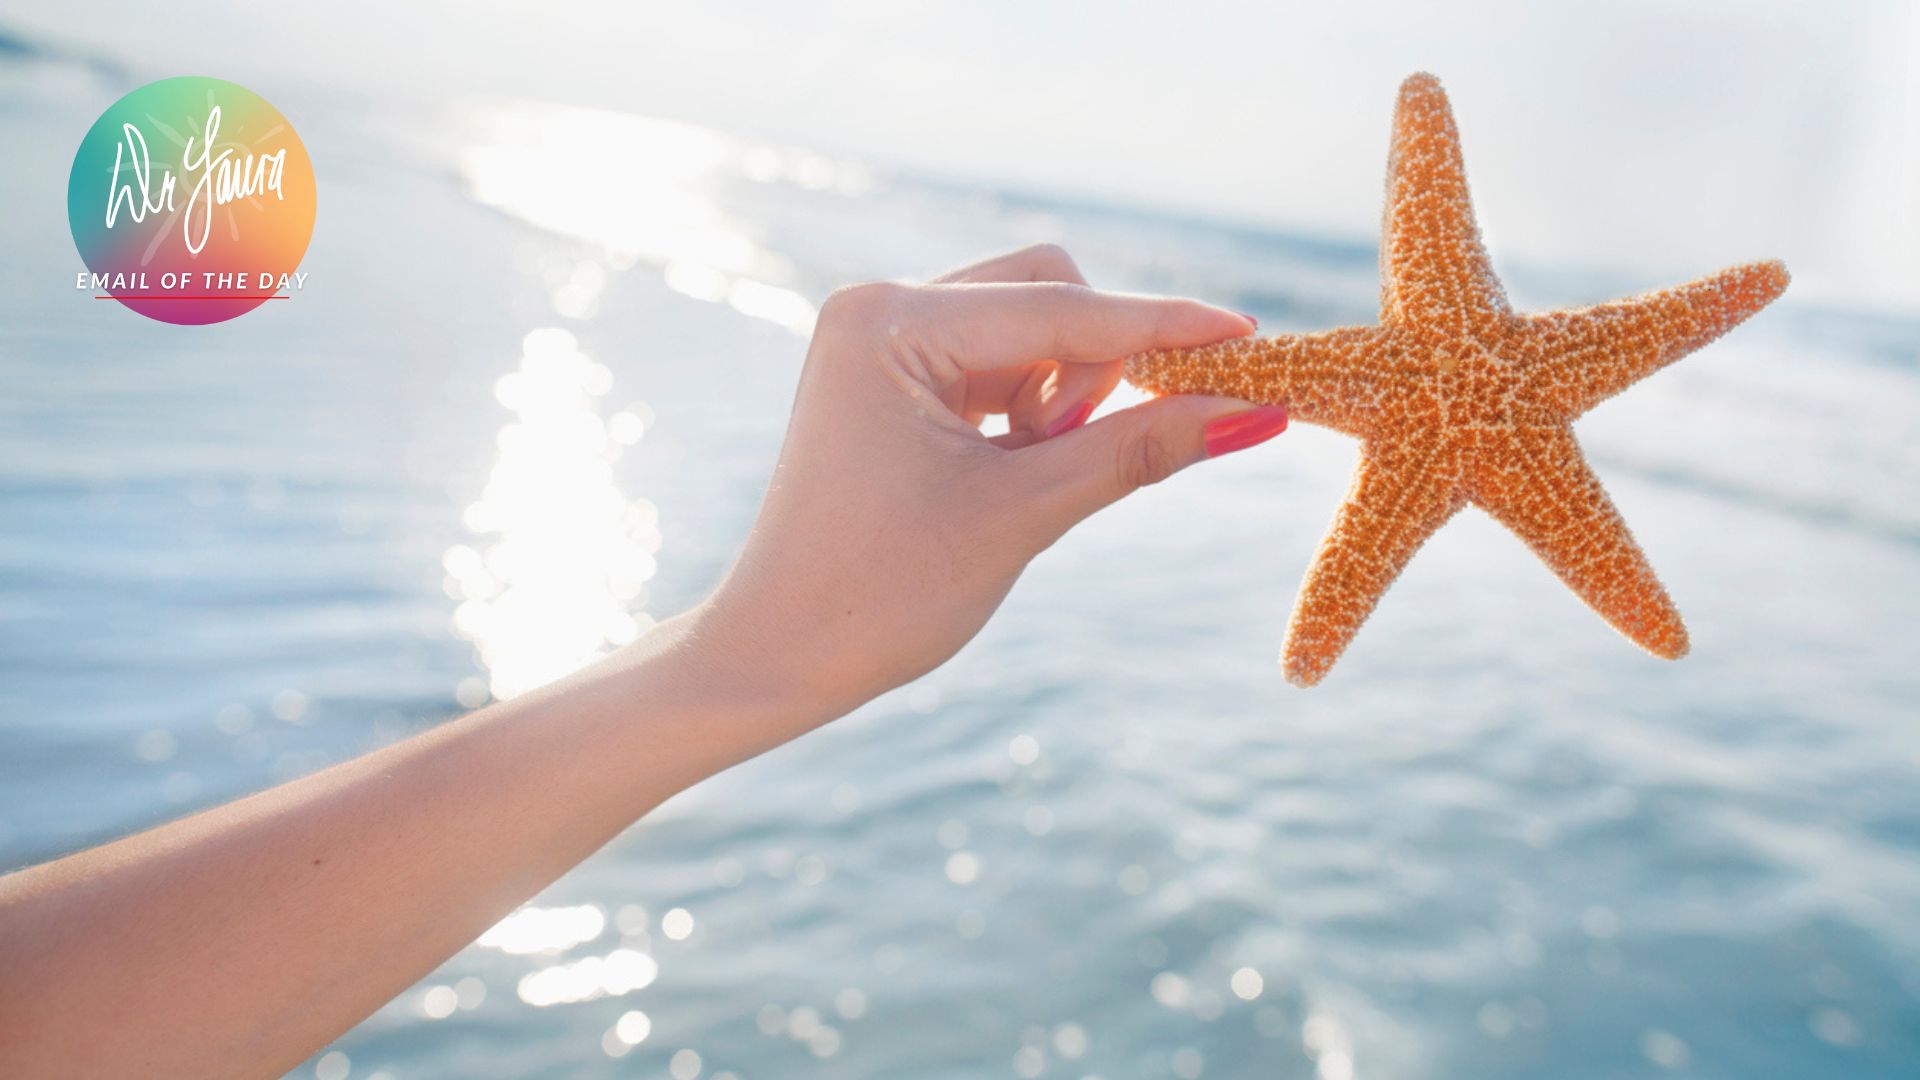 Email of the Day: A Note From One of Your Starfish